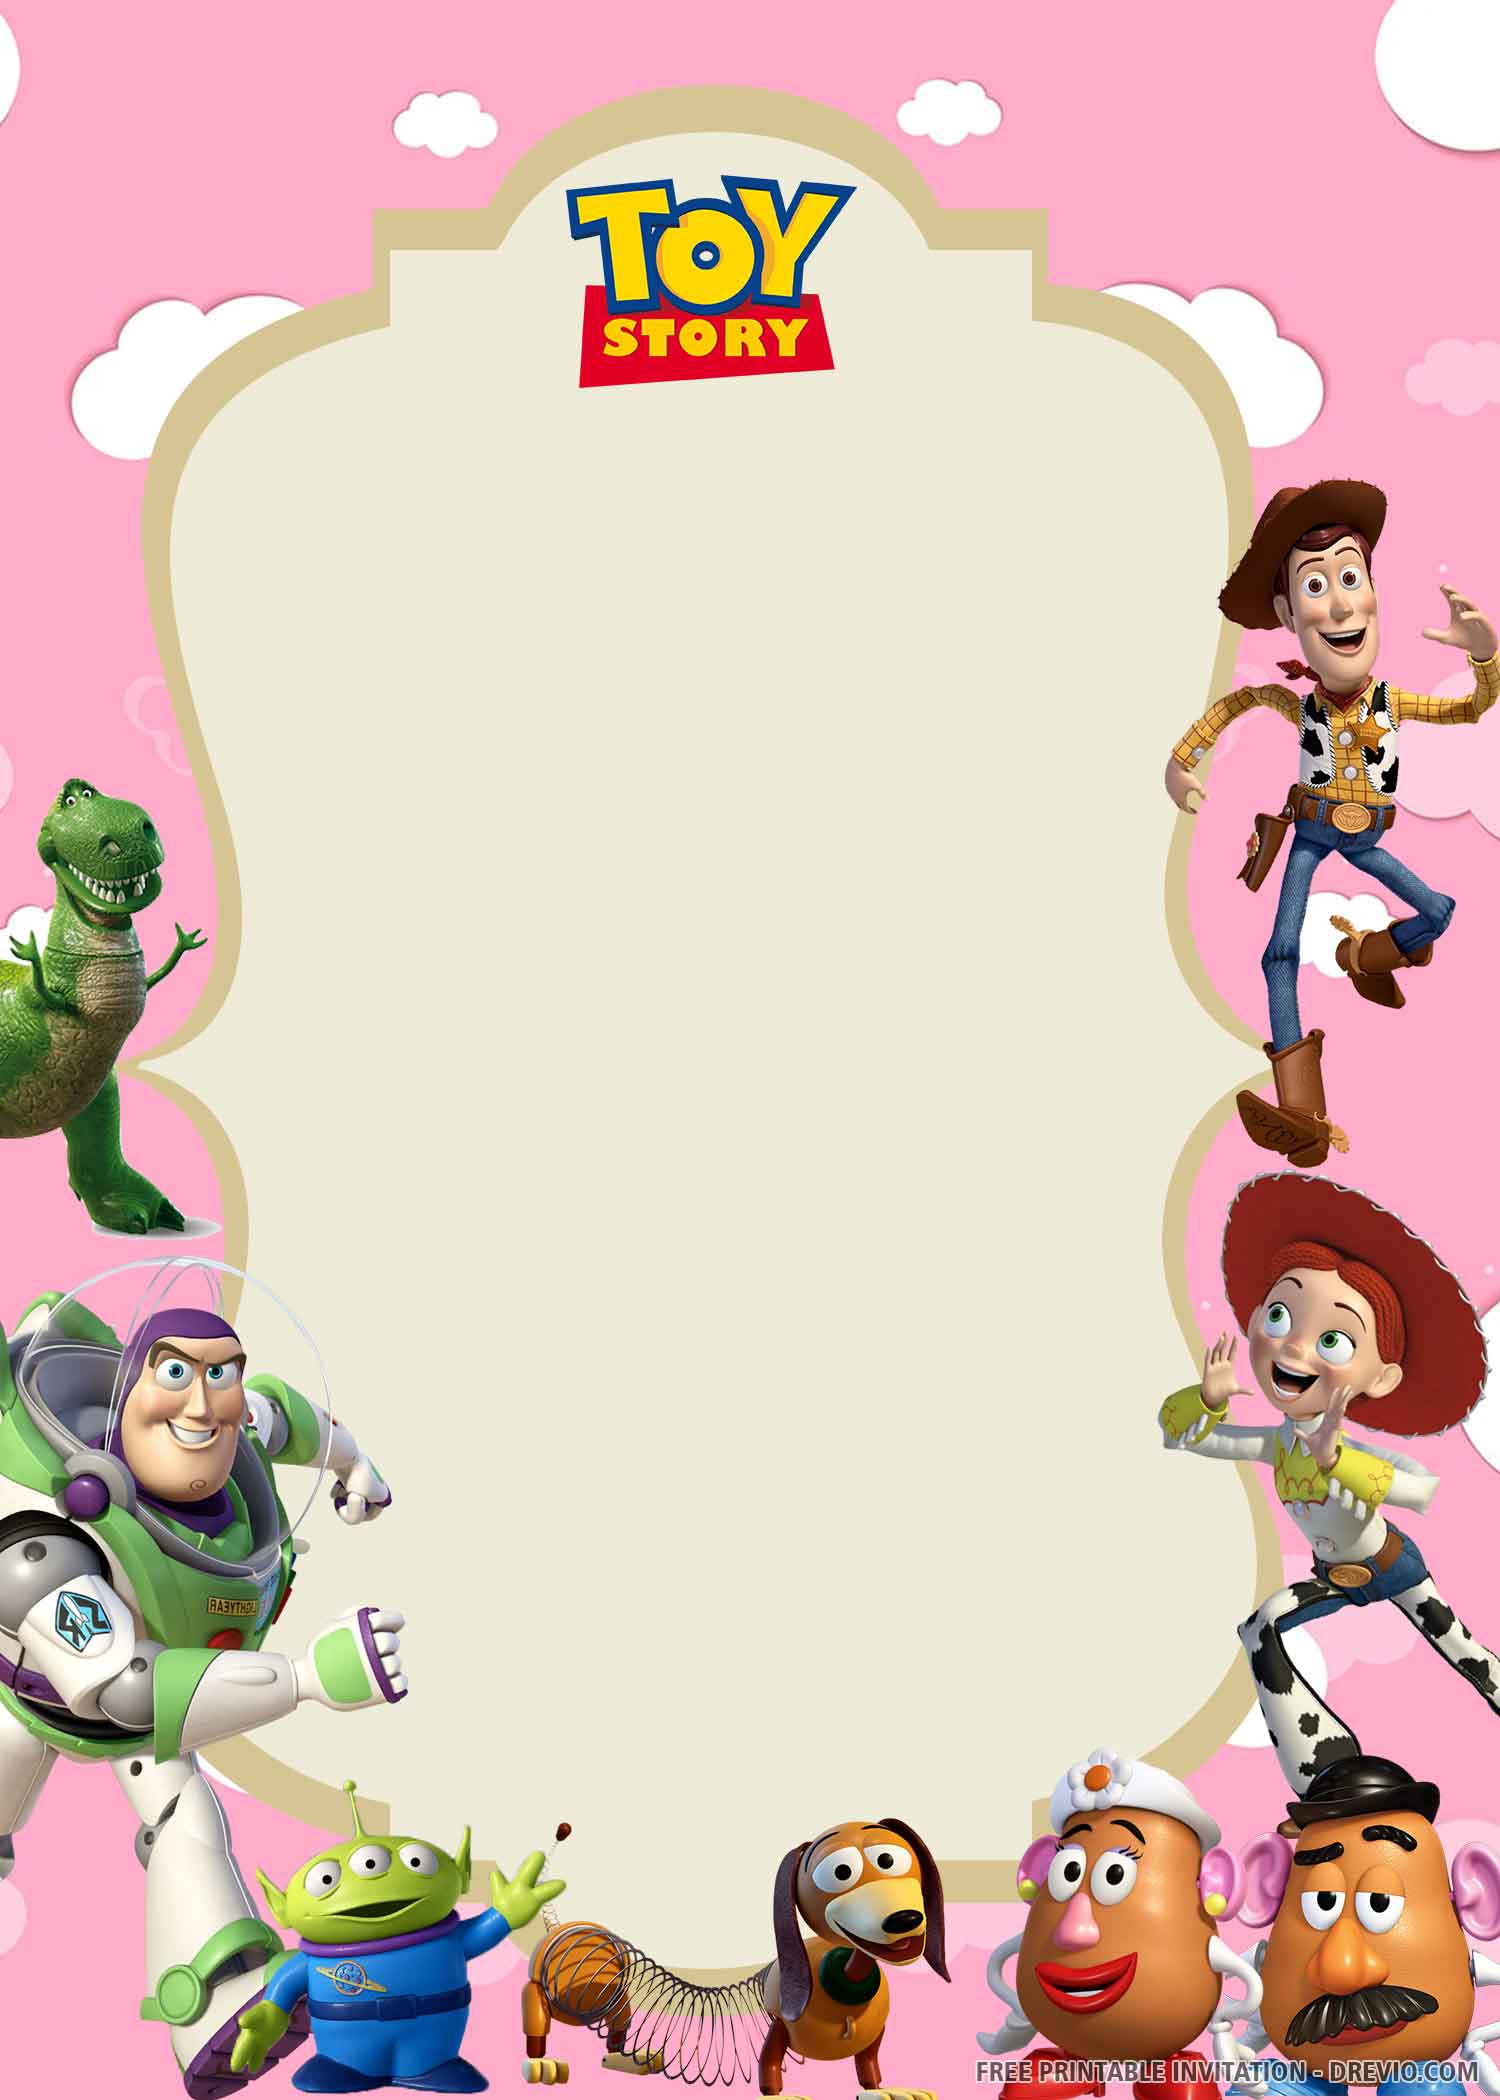 Toy Story Personalized Cake Topper | birdieandshoosh